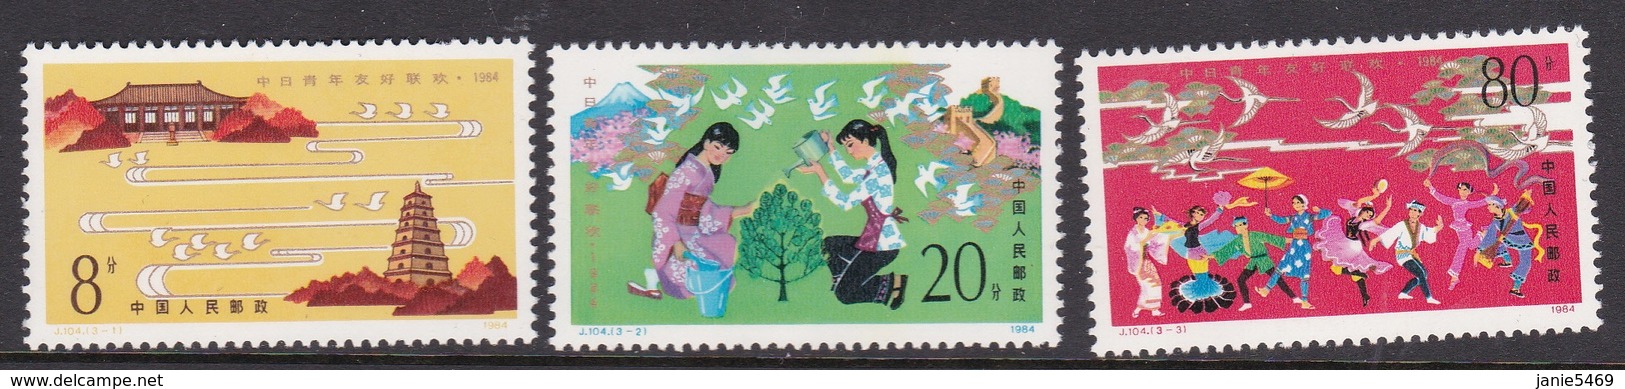 China People's Republic SG 3340-3342 1984 Youth Friendship Festival, Mint Never Hinged - Ongebruikt